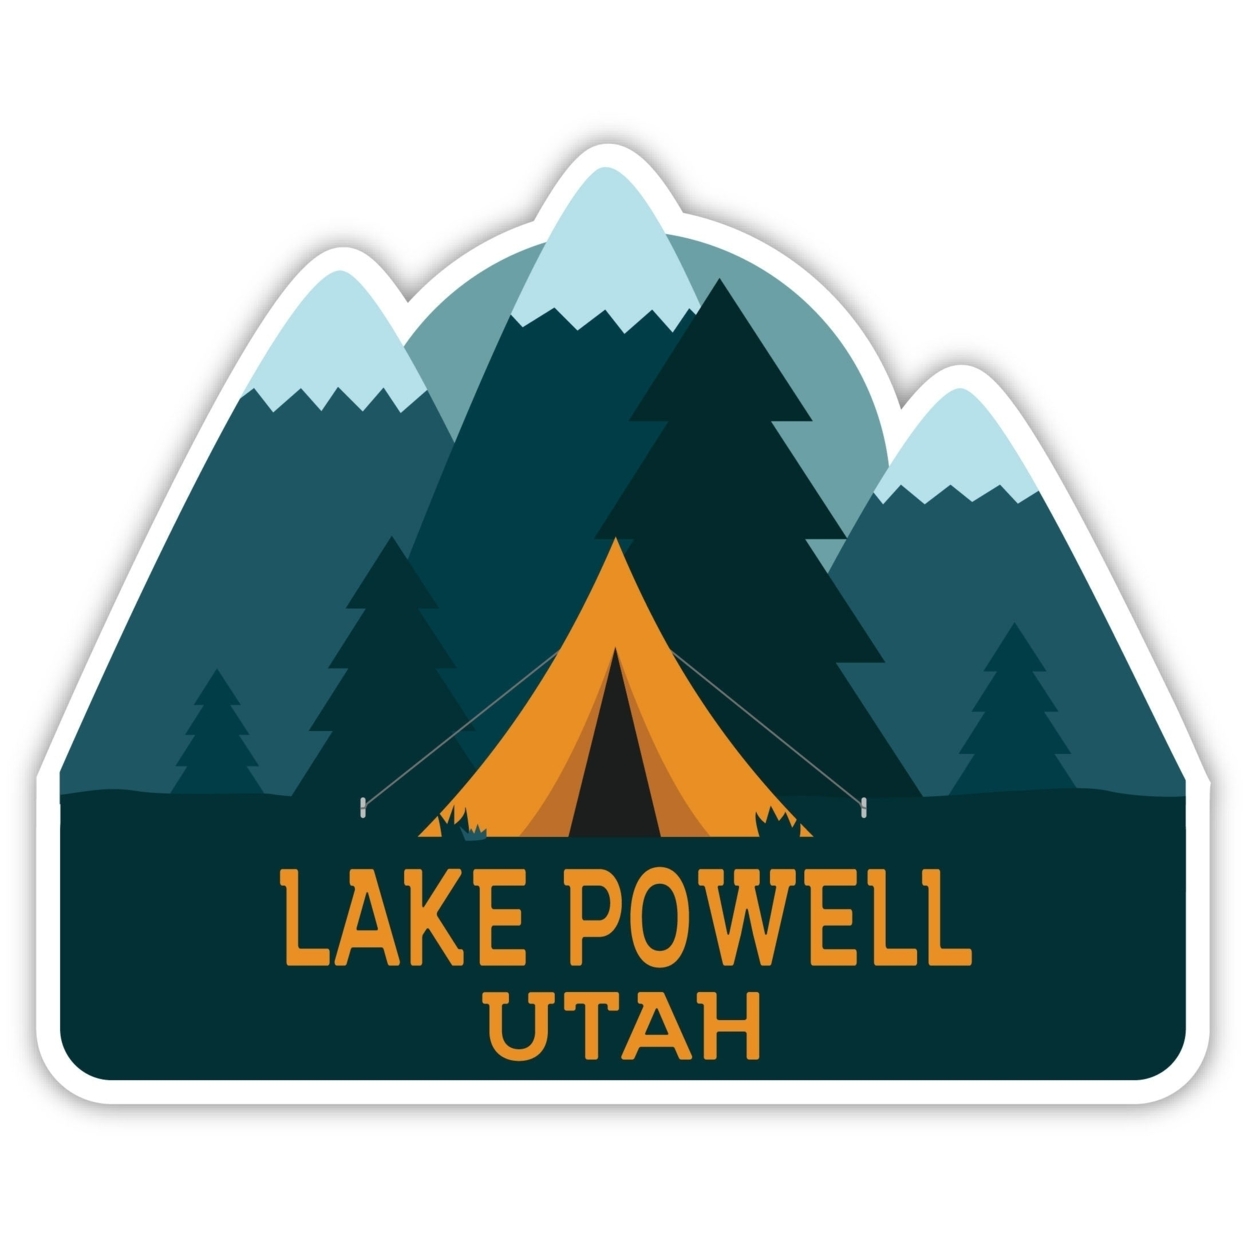 Lake Powell Utah Souvenir Decorative Stickers (Choose Theme And Size) - 2-Inch, Adventures Awaits